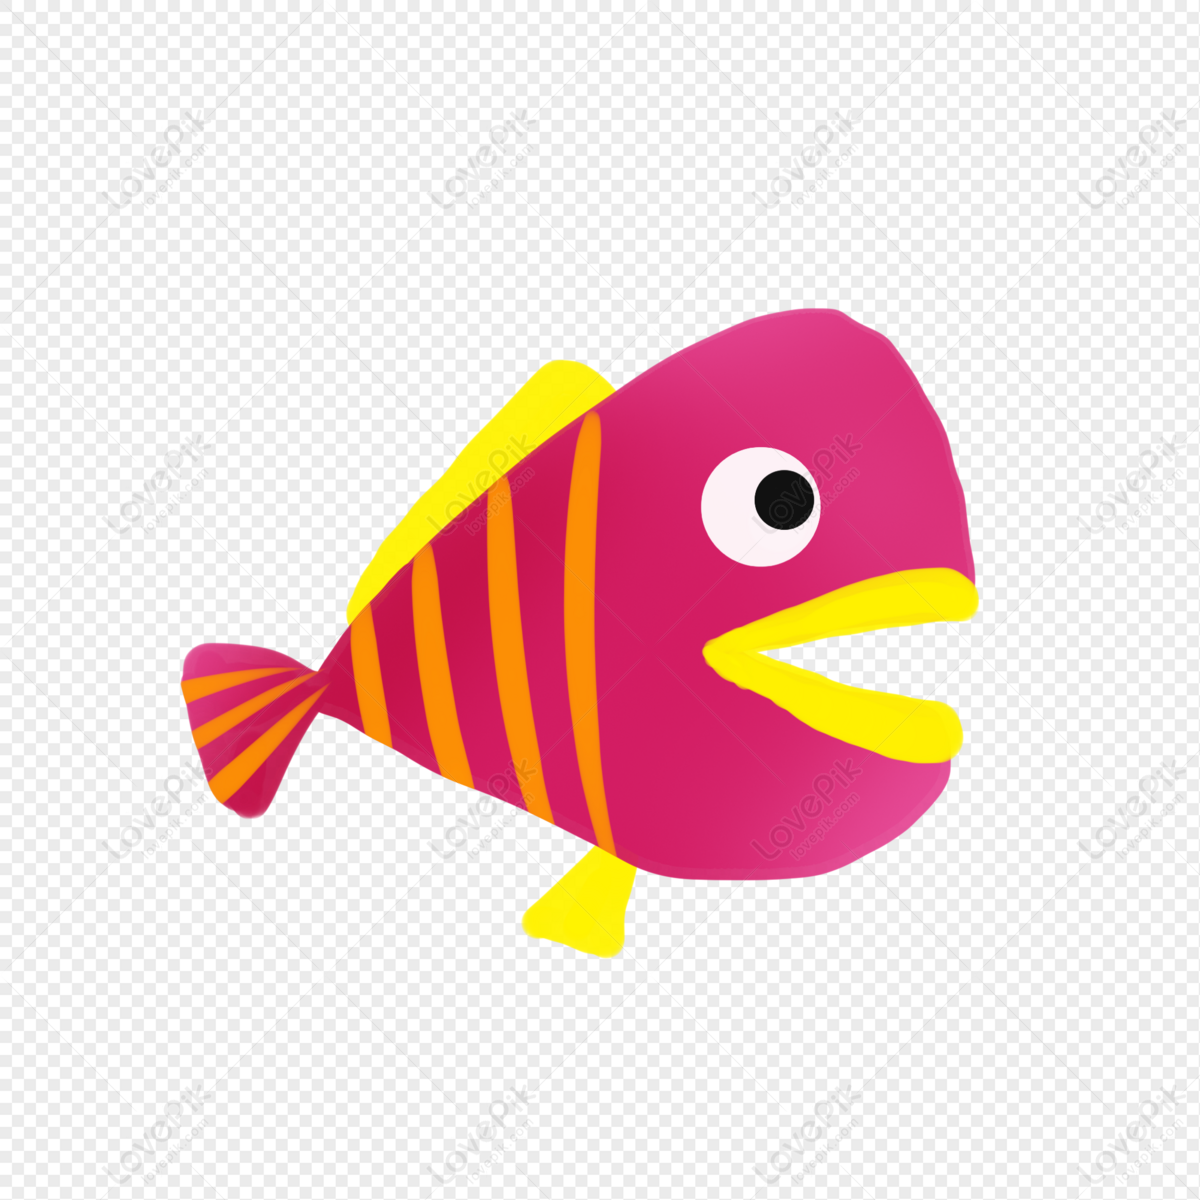 Pink Tropical Fish PNG Image Free Download And Clipart Image For Free  Download - Lovepik | 401318831